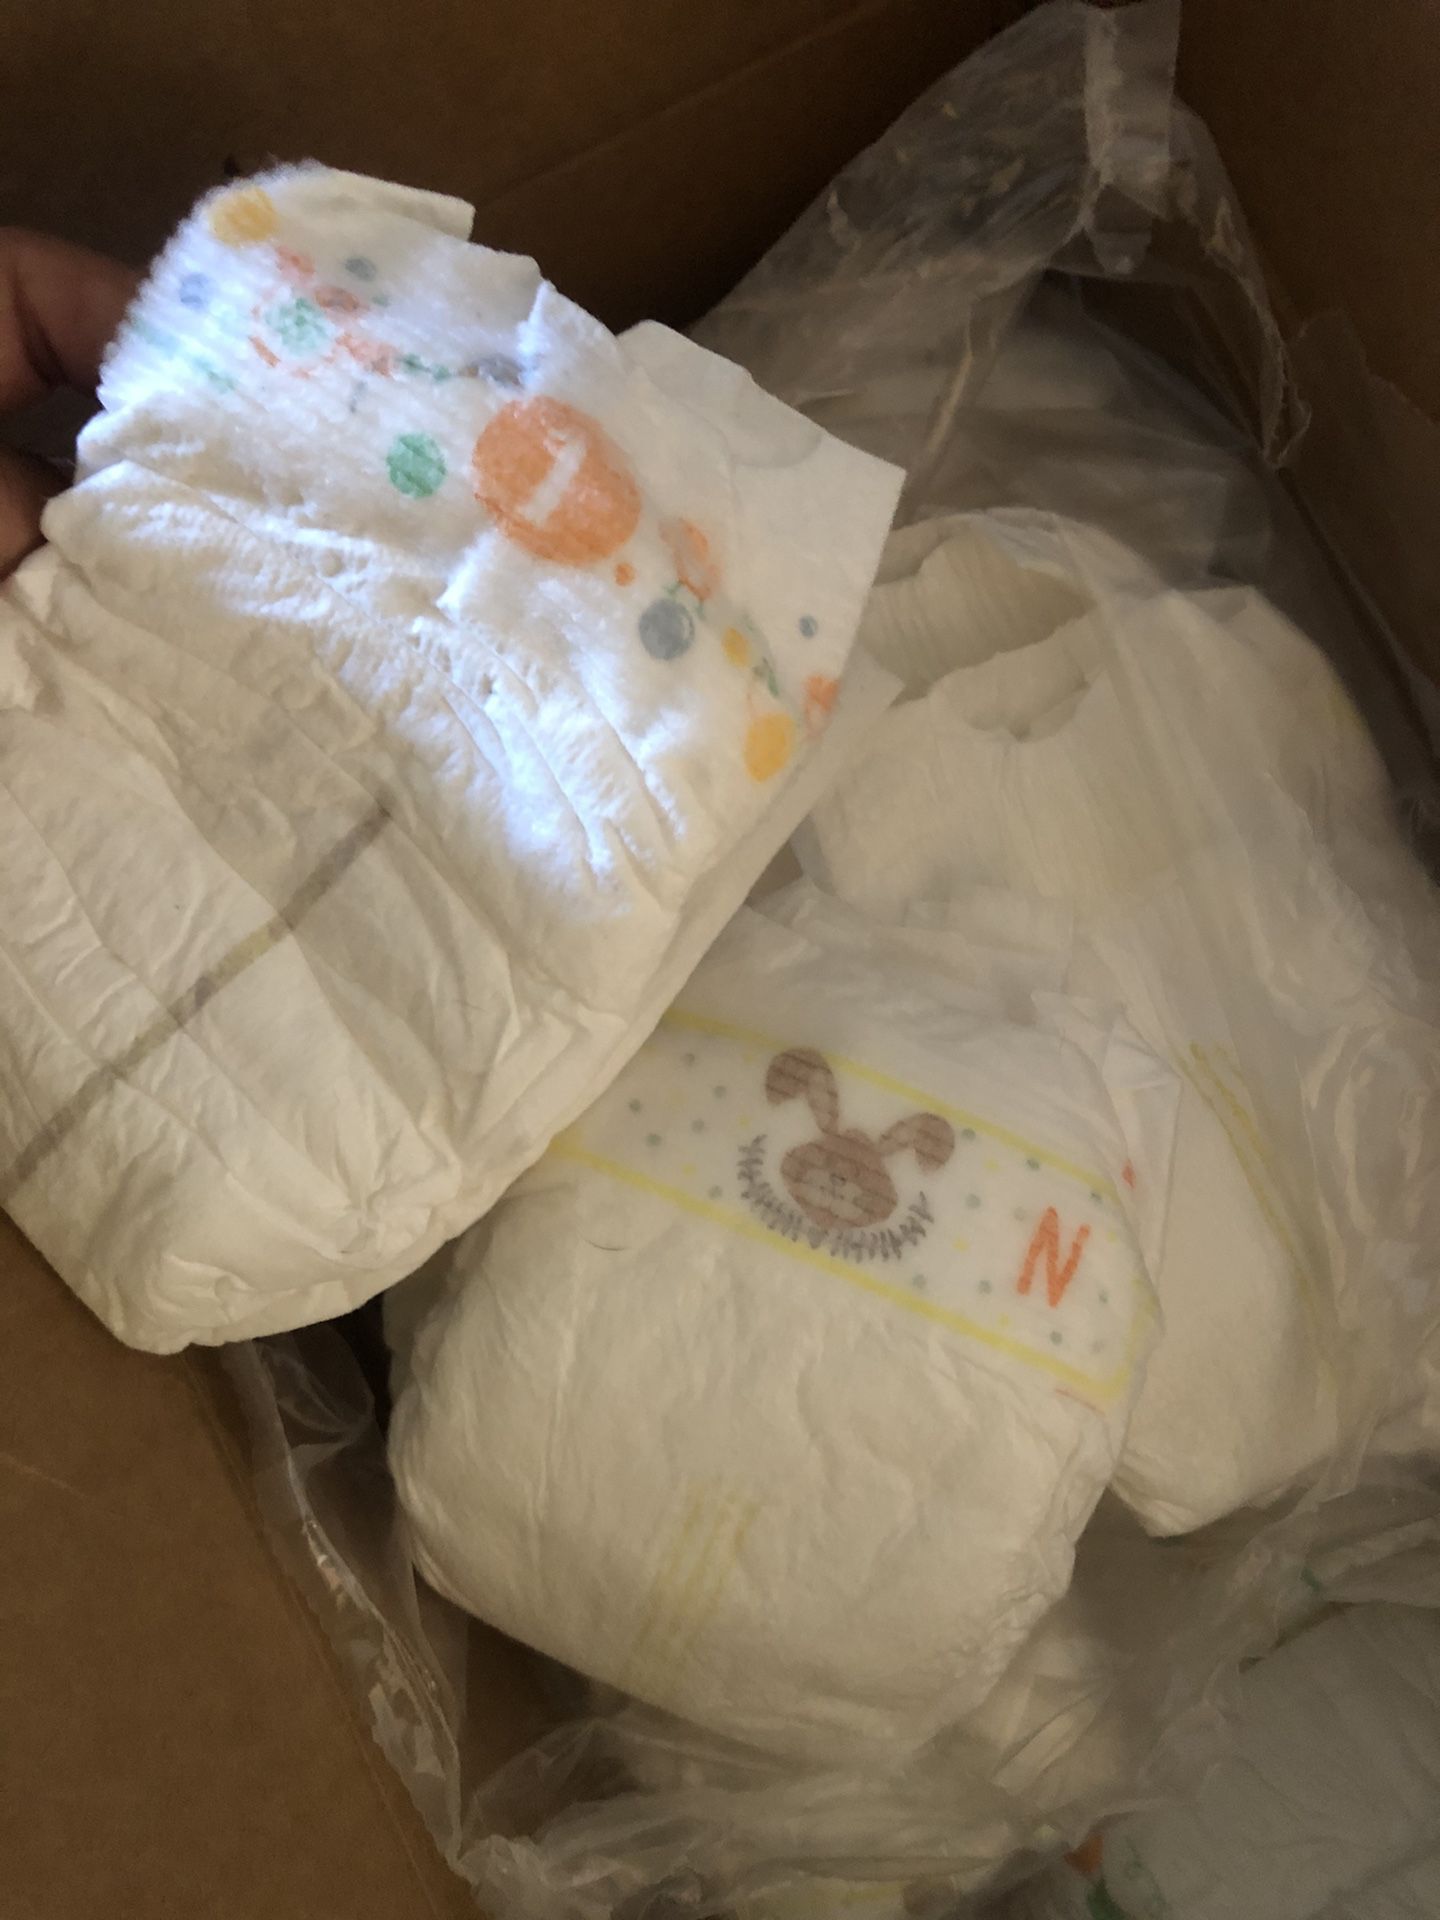 Diapers N & size 1